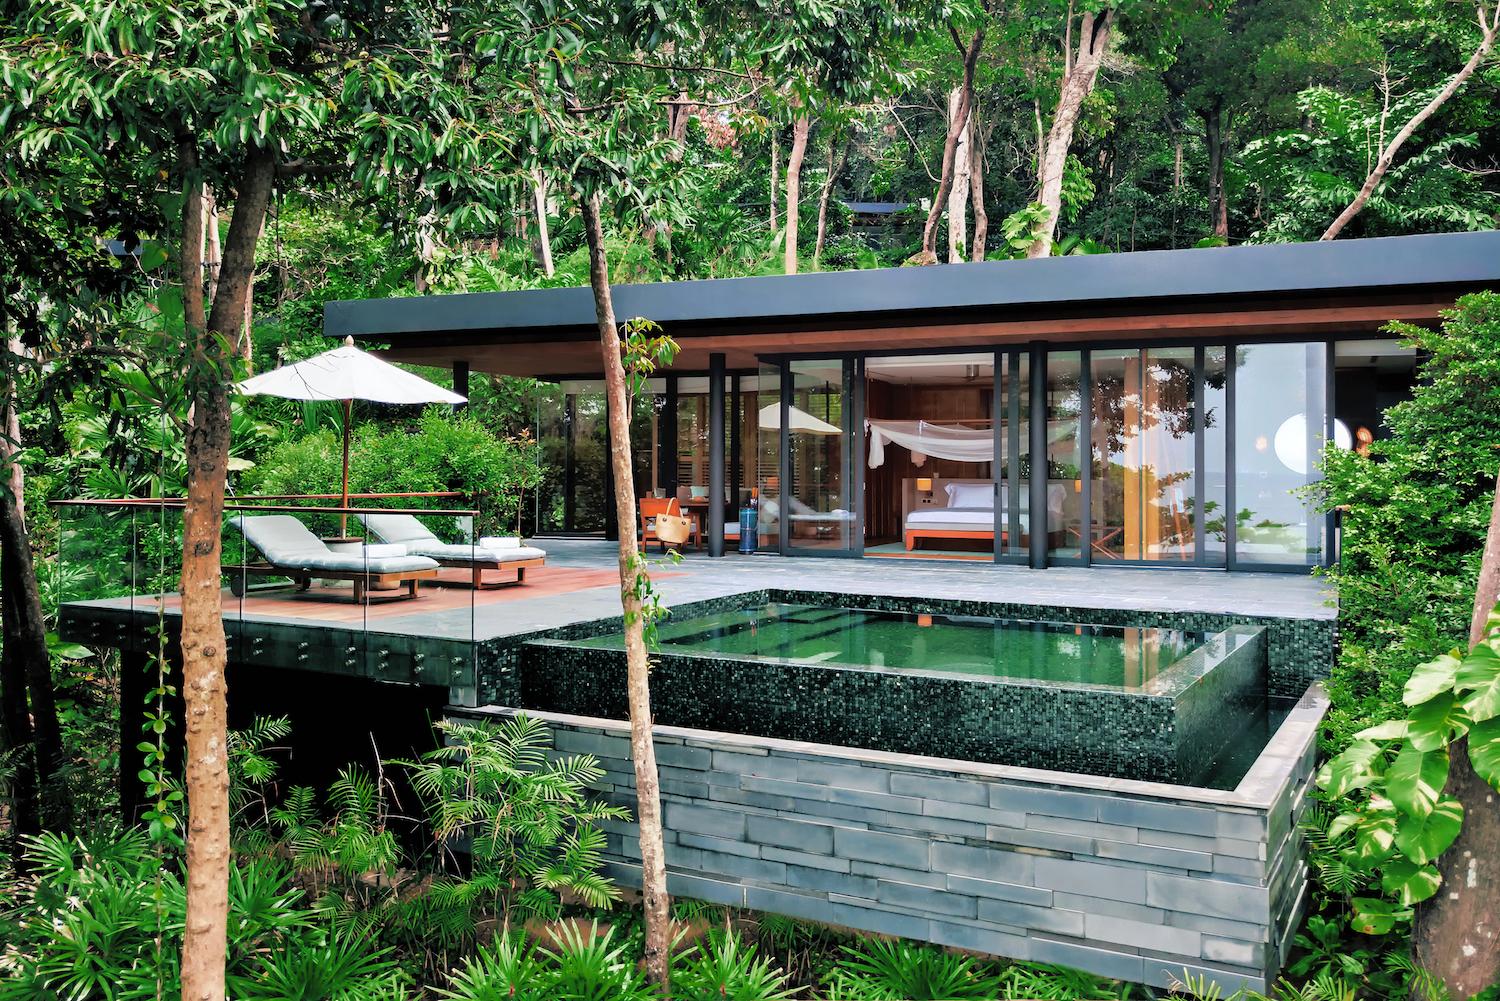 Six Senses Krabey Island will feature 40 private pool villas with green living roofs, sun decks with infinity plunge pools and rain showers / 